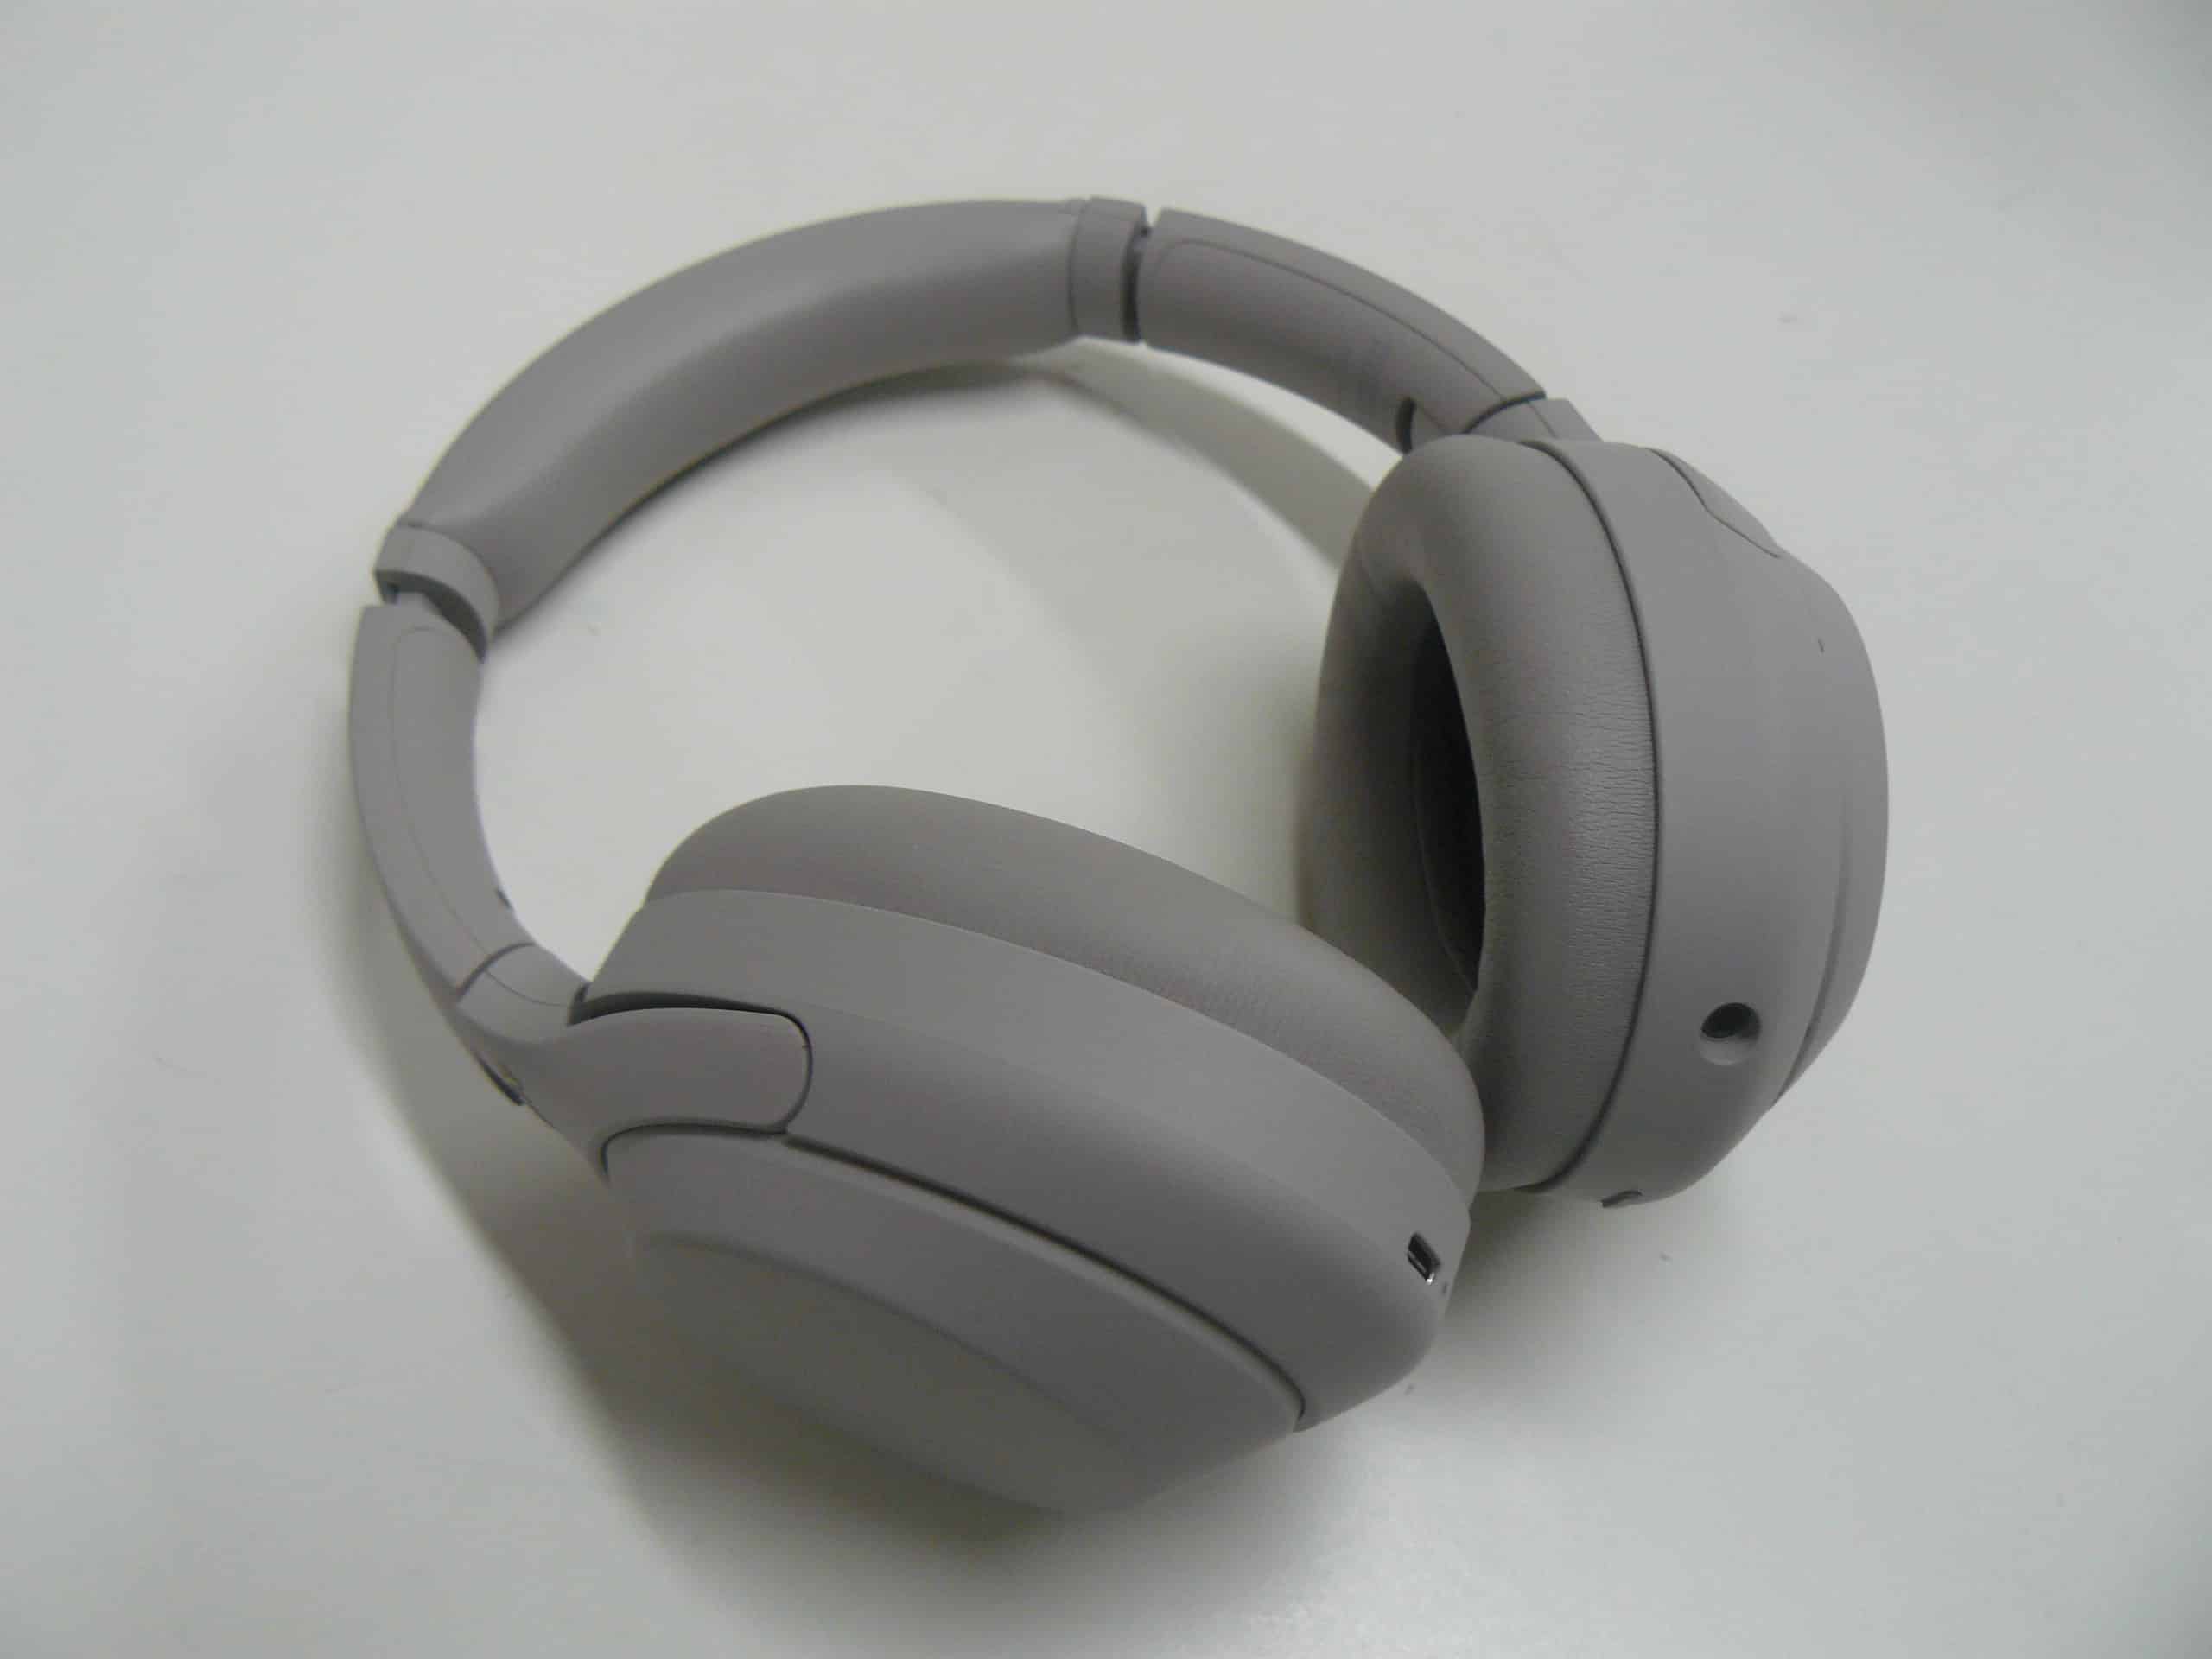 Sony WH-1000XM4 headphone review